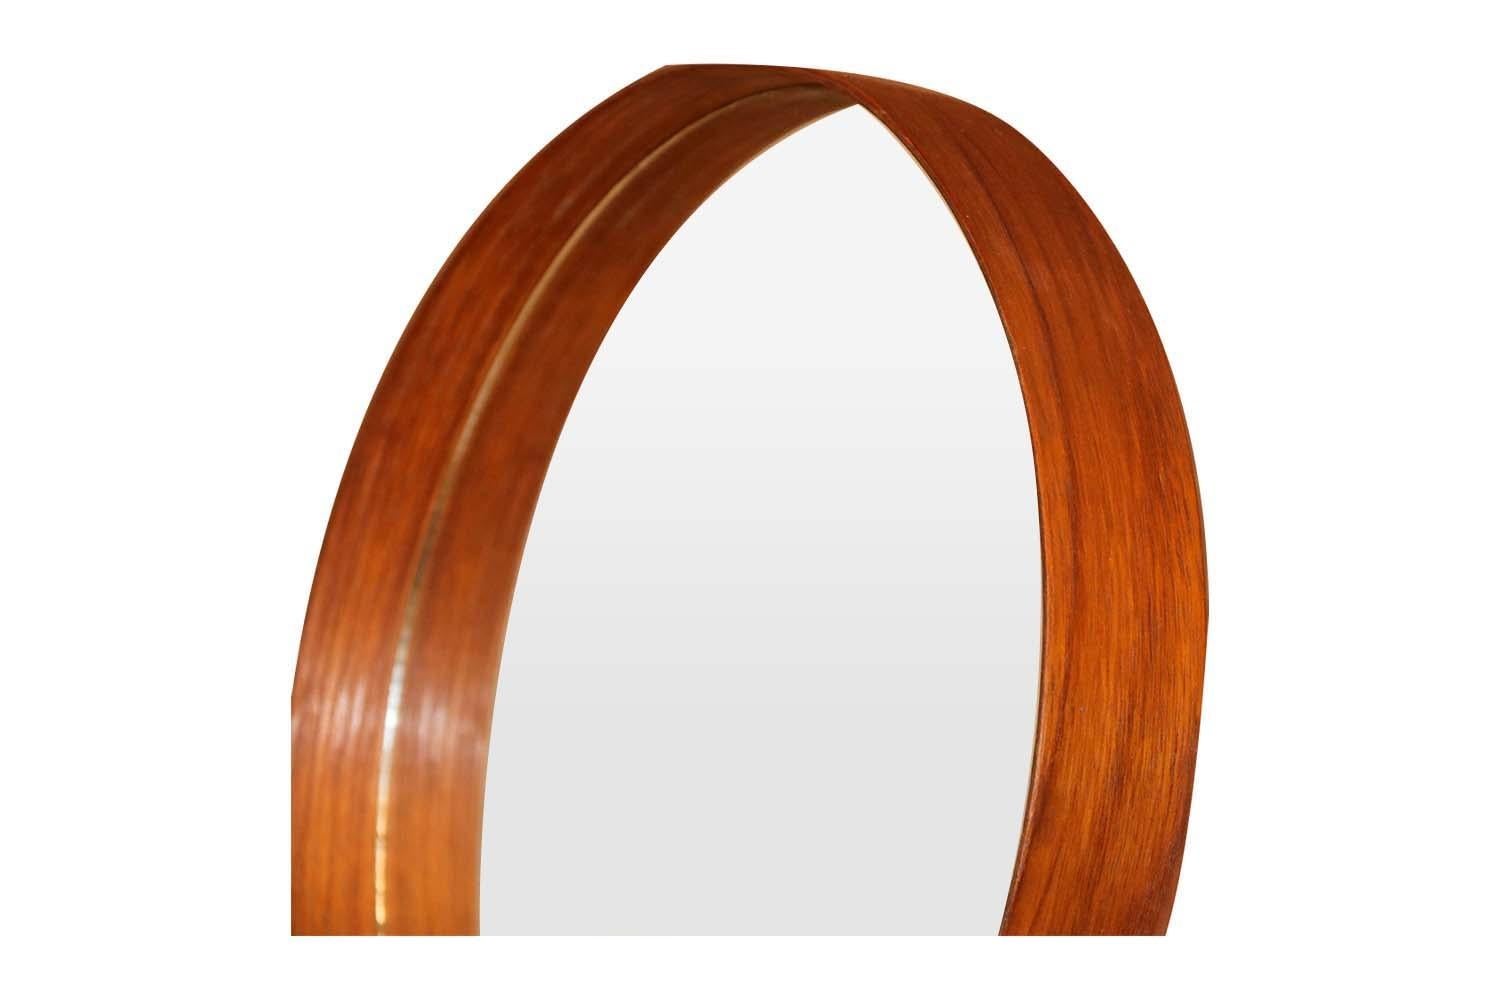 A fabulous table mirror designed by Uno and O¨sten Kristiansson for Luxus, Sweden, 1960. Remaining in gorgeous condition. Features a circular teak frame, in a striking teak finish, the mirror is supported on dovetail L-shaped angled legs exquisite